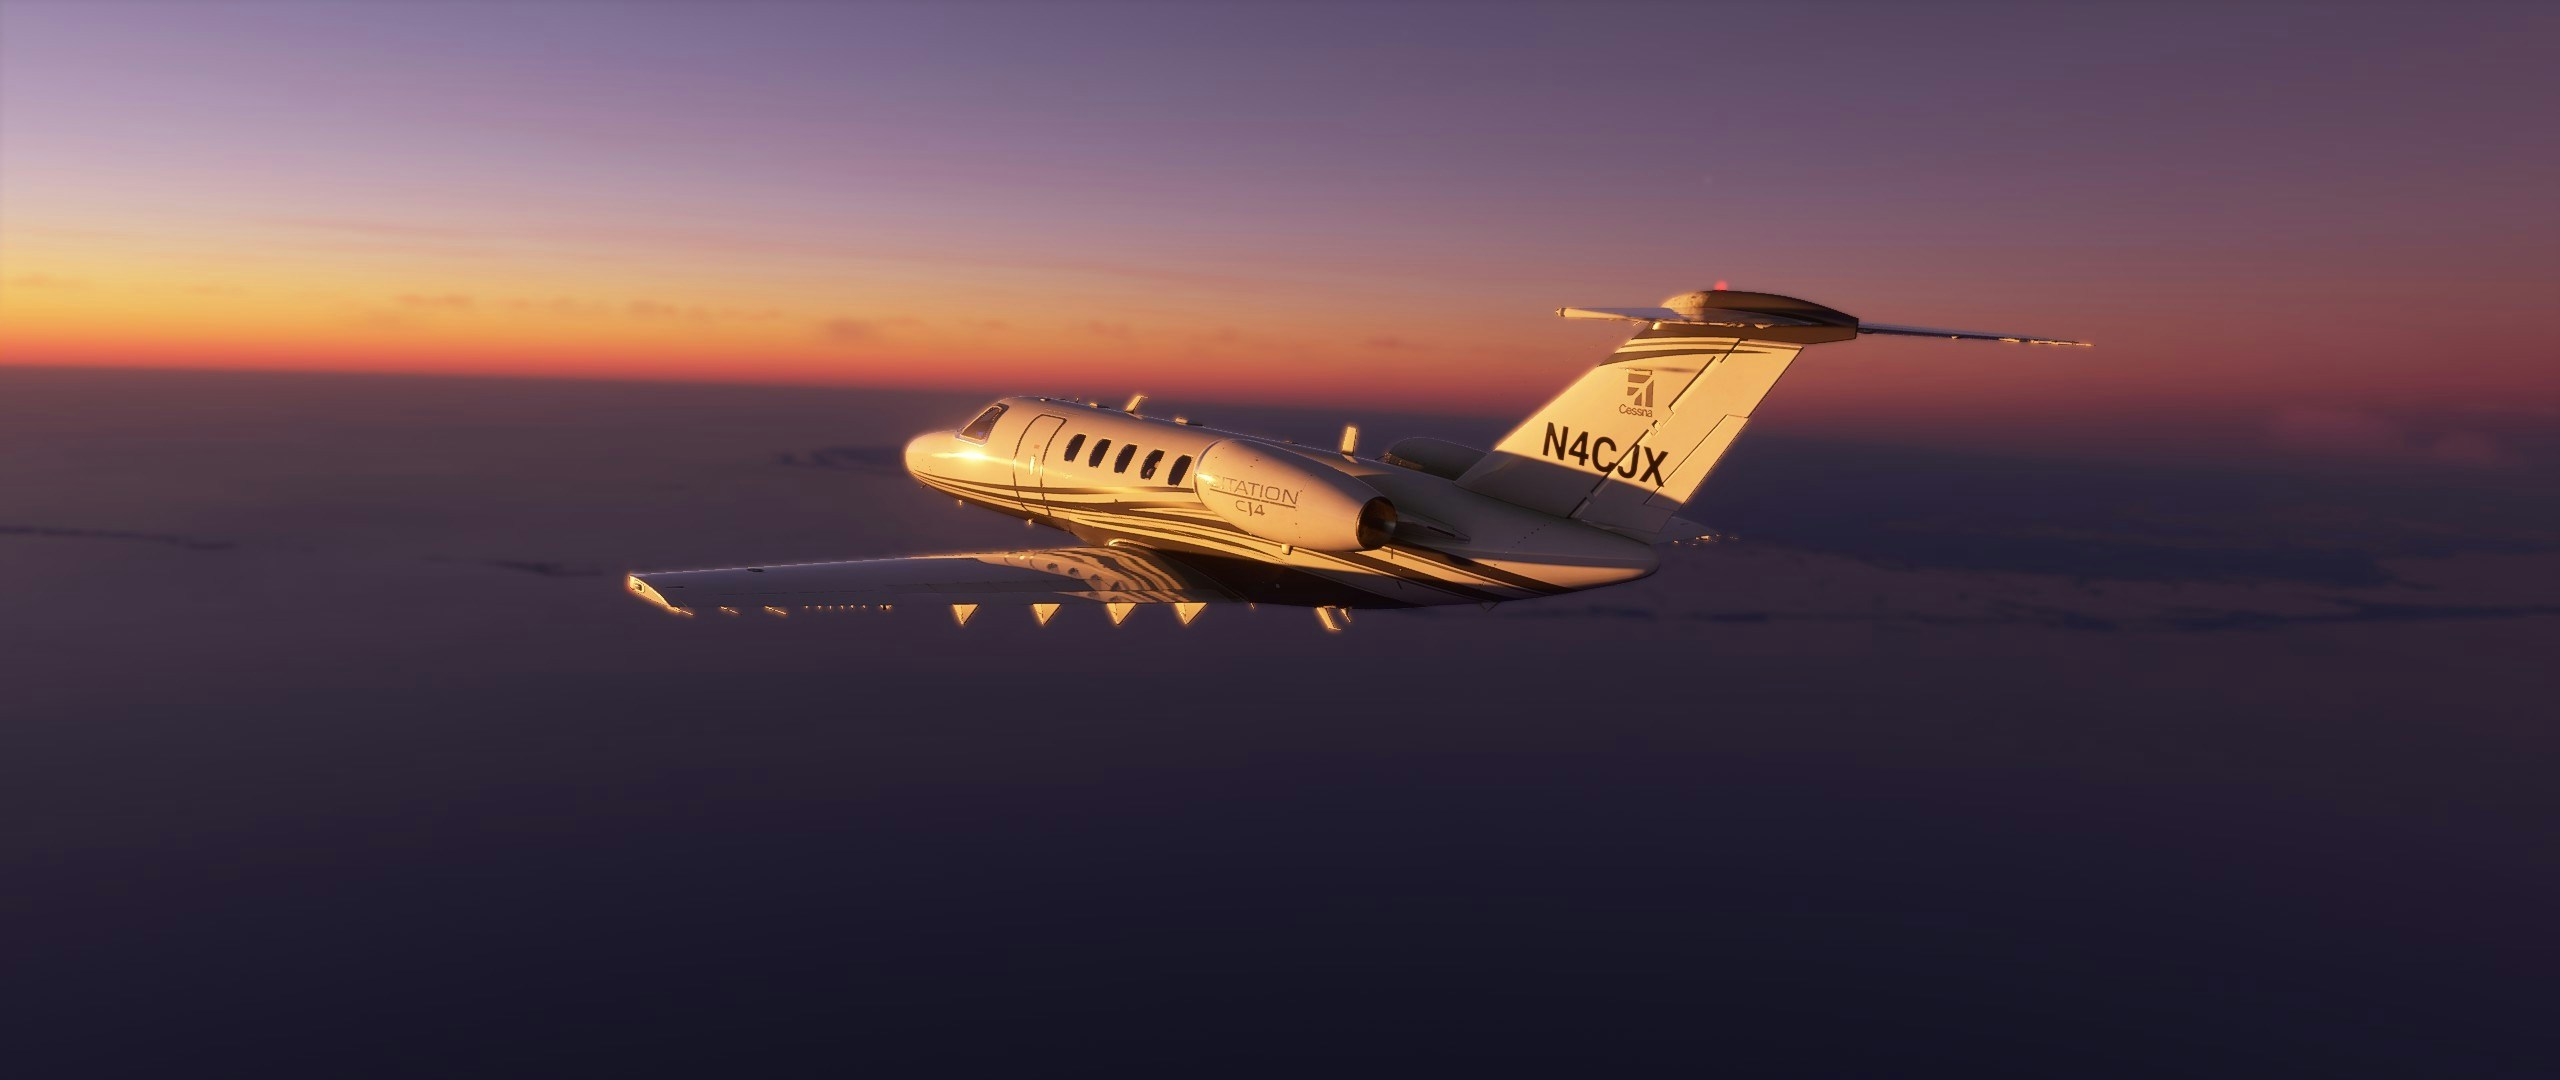 Magknight Showcases New 787 FMC, Gear, and Wing Models